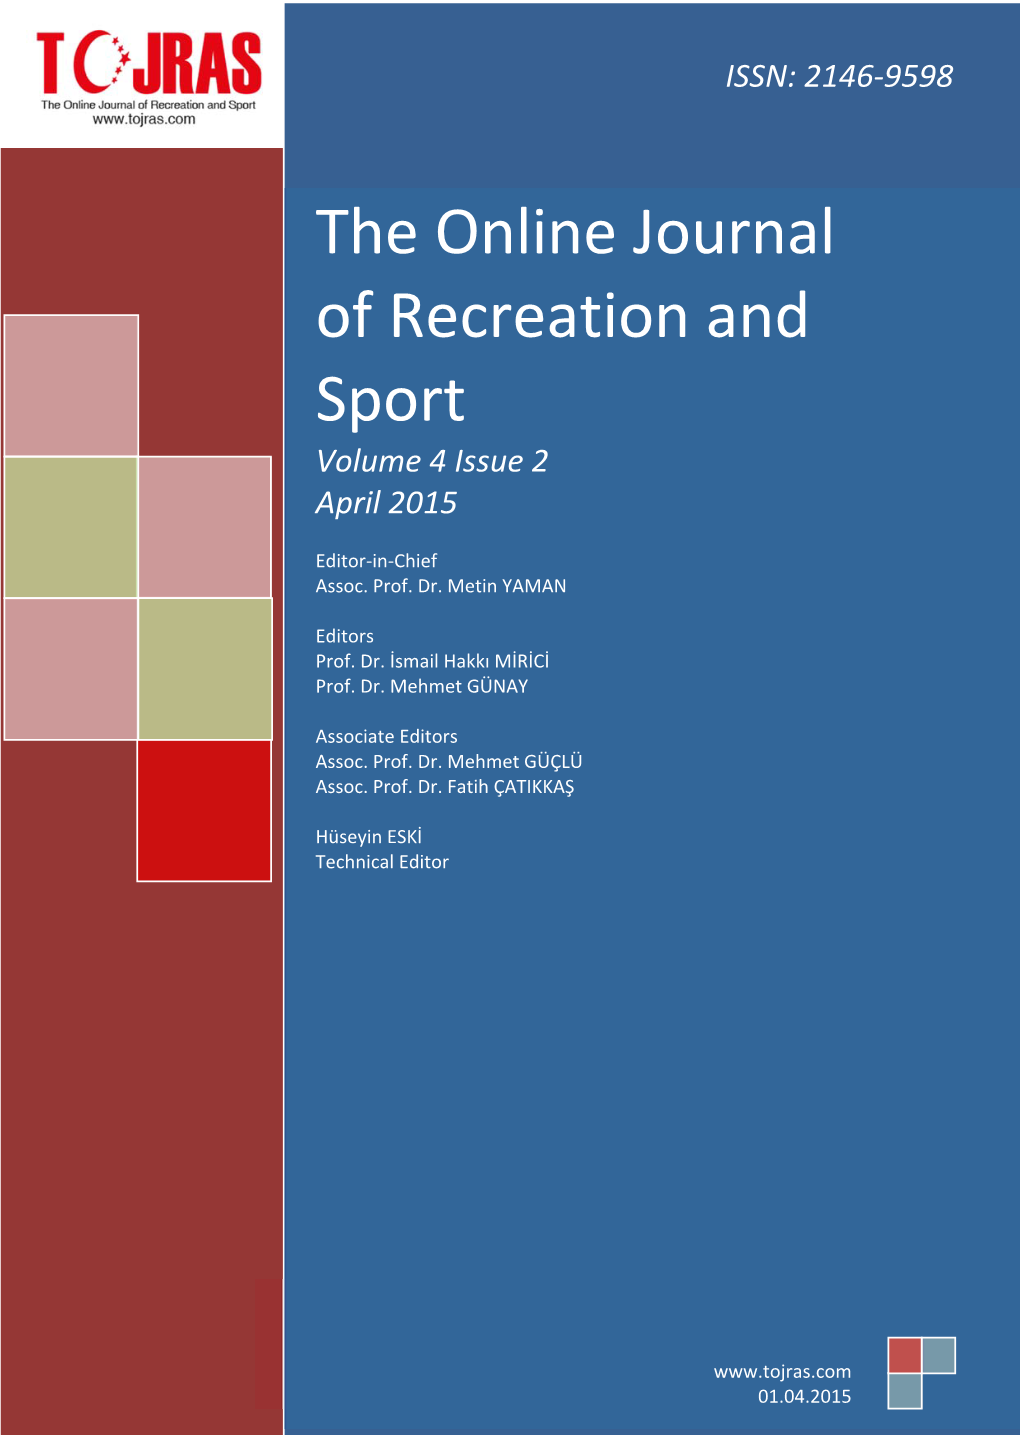 The Online Journal of Recreation and Sport Volume 4 Issue 2 April 2015